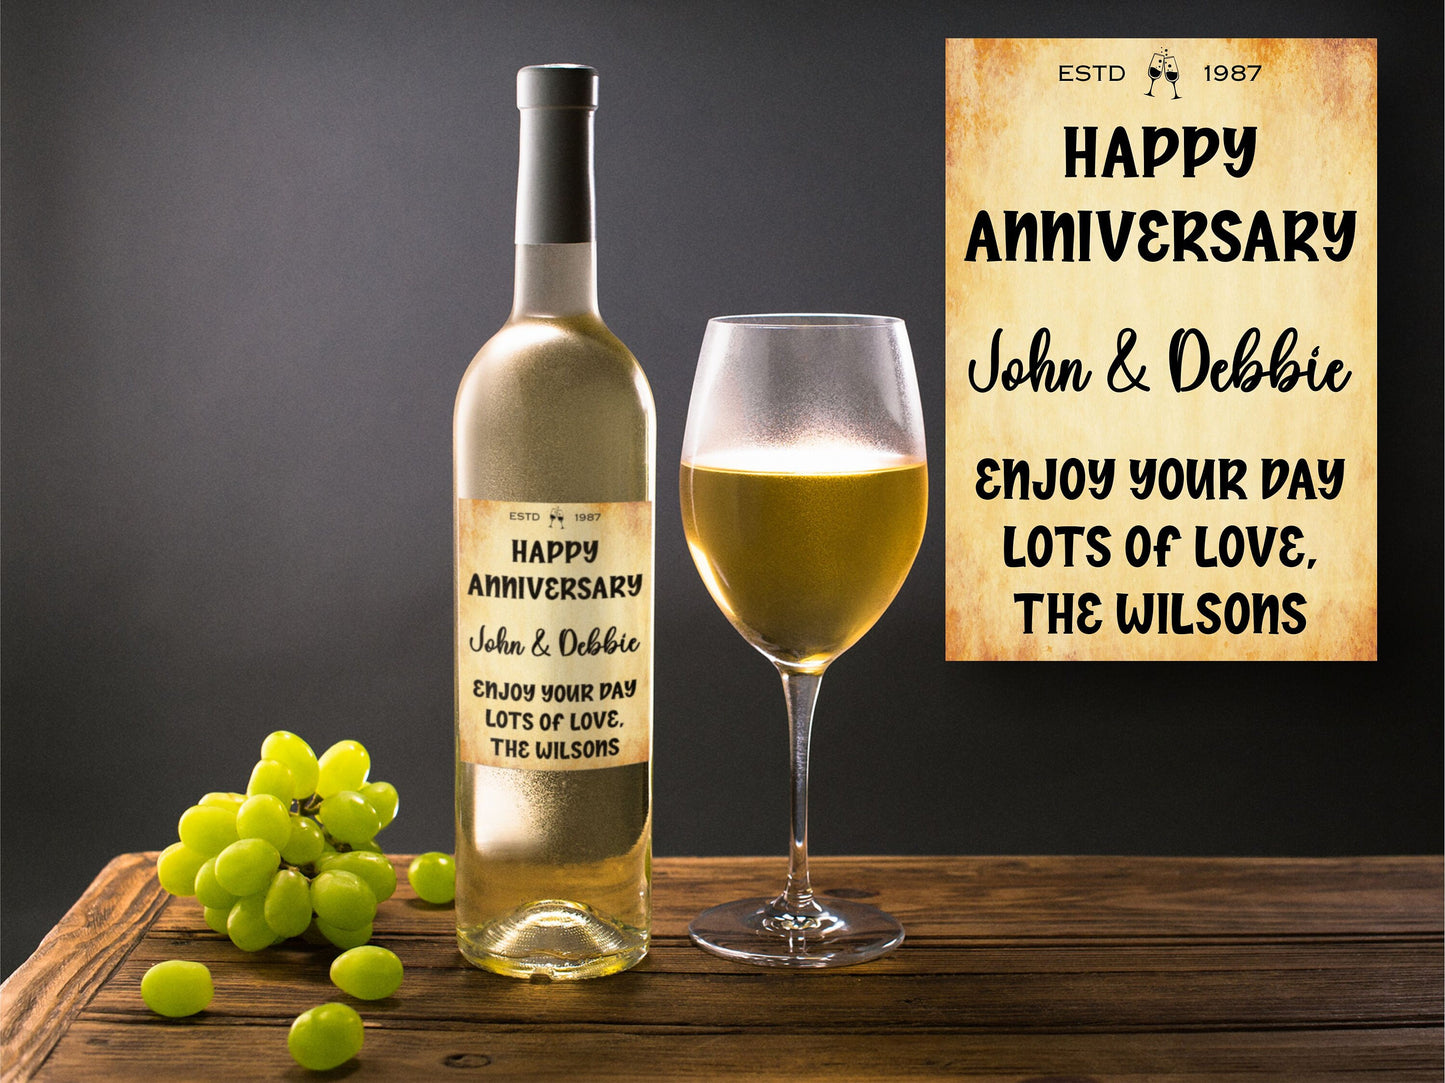 Happy Anniversary Bottle Labels  x2 - Vintage Style - Any Name Year and Message - To fit Wine Alcohol Bottles 68x99mm